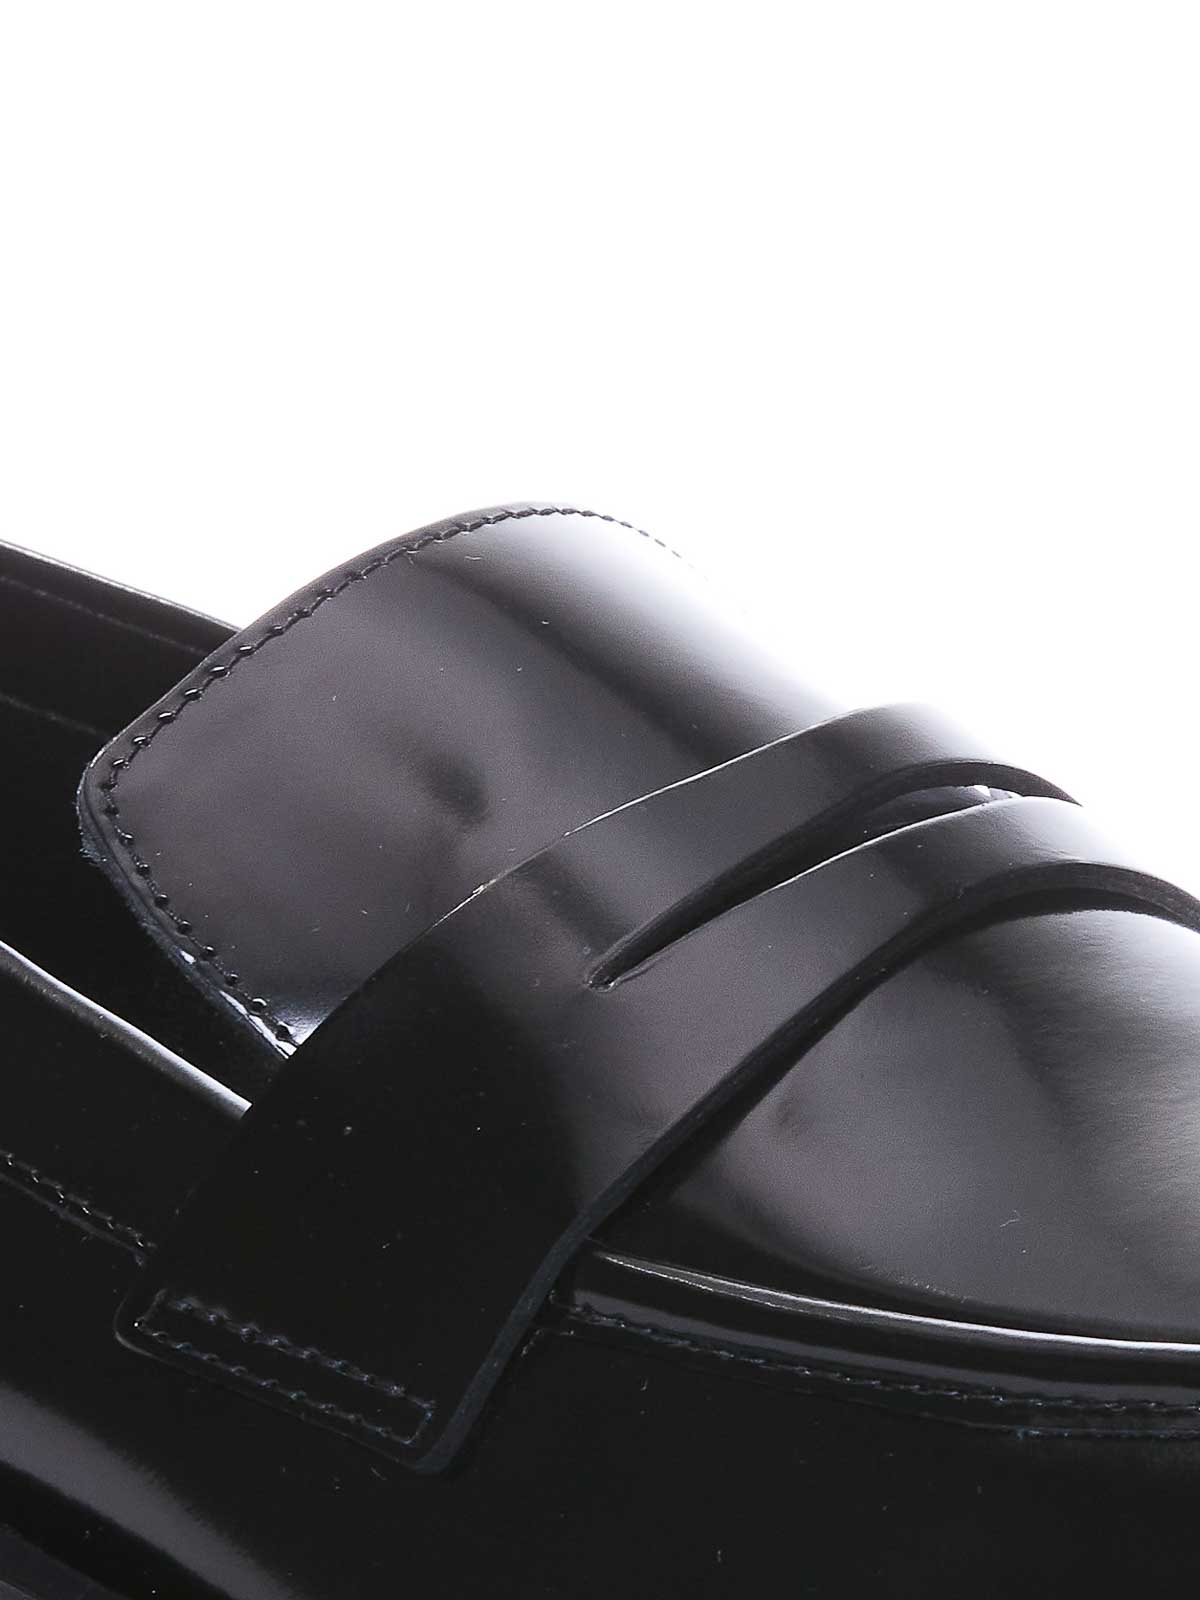 Shop Stuart Weitzman Black Palmer Loafers With Round Toe